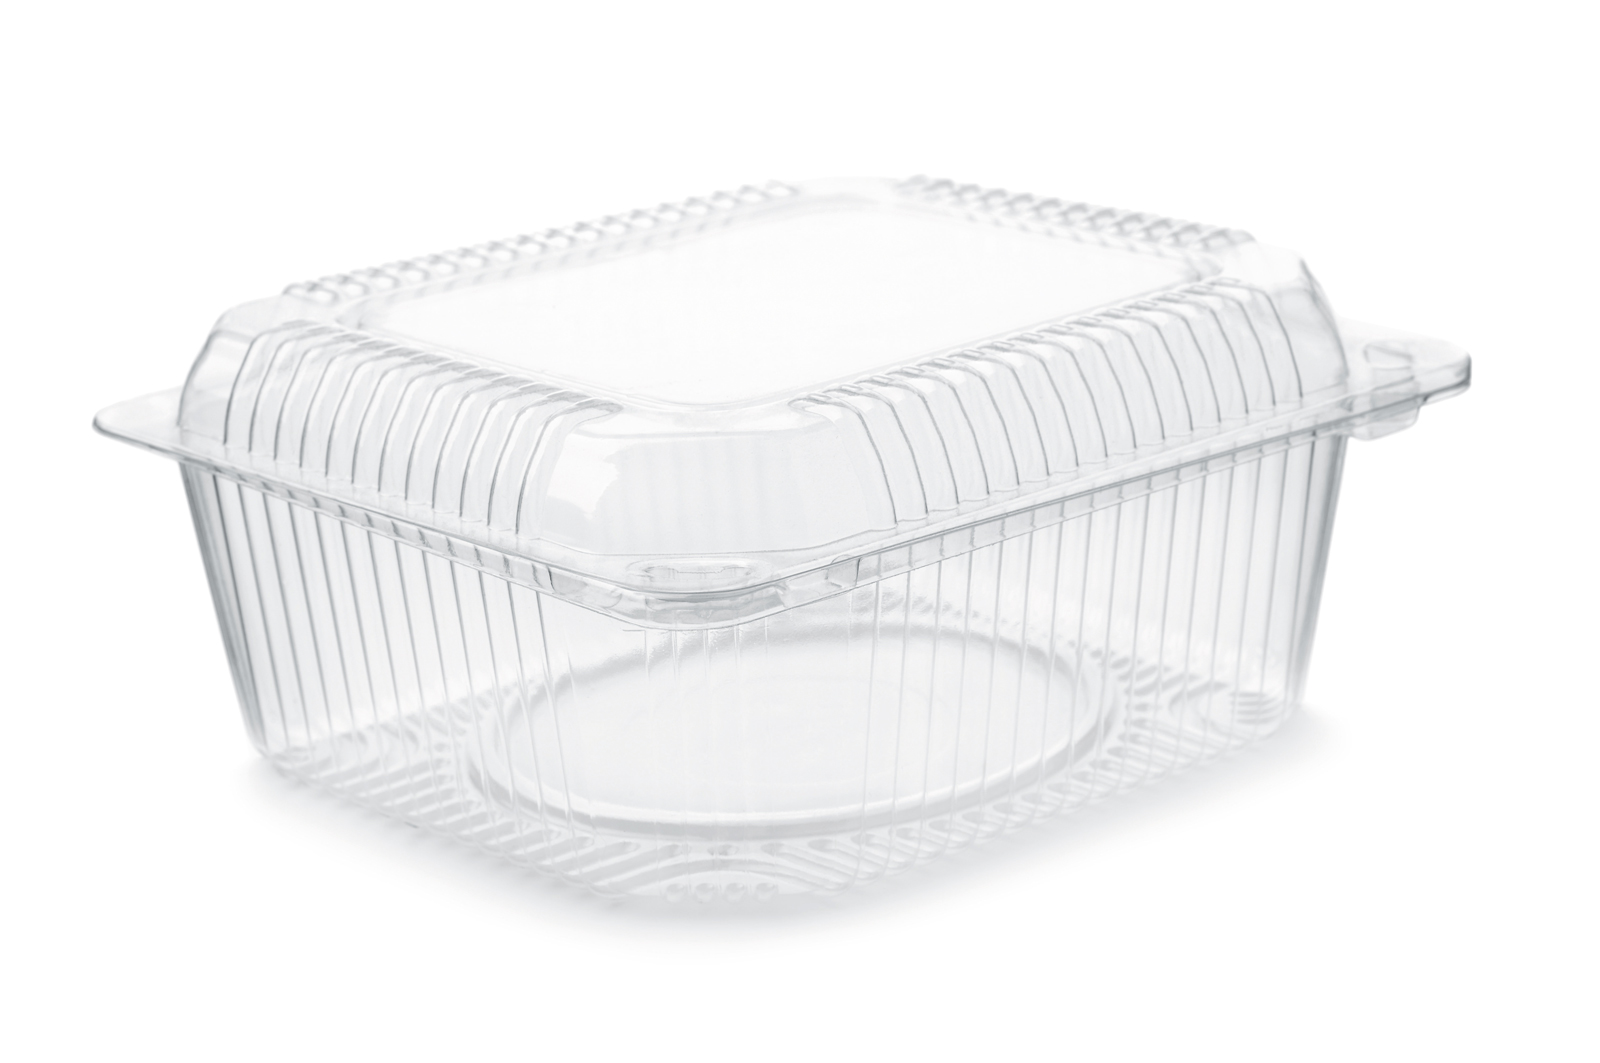 A clear plastic package for storing baked goods at a supermarket